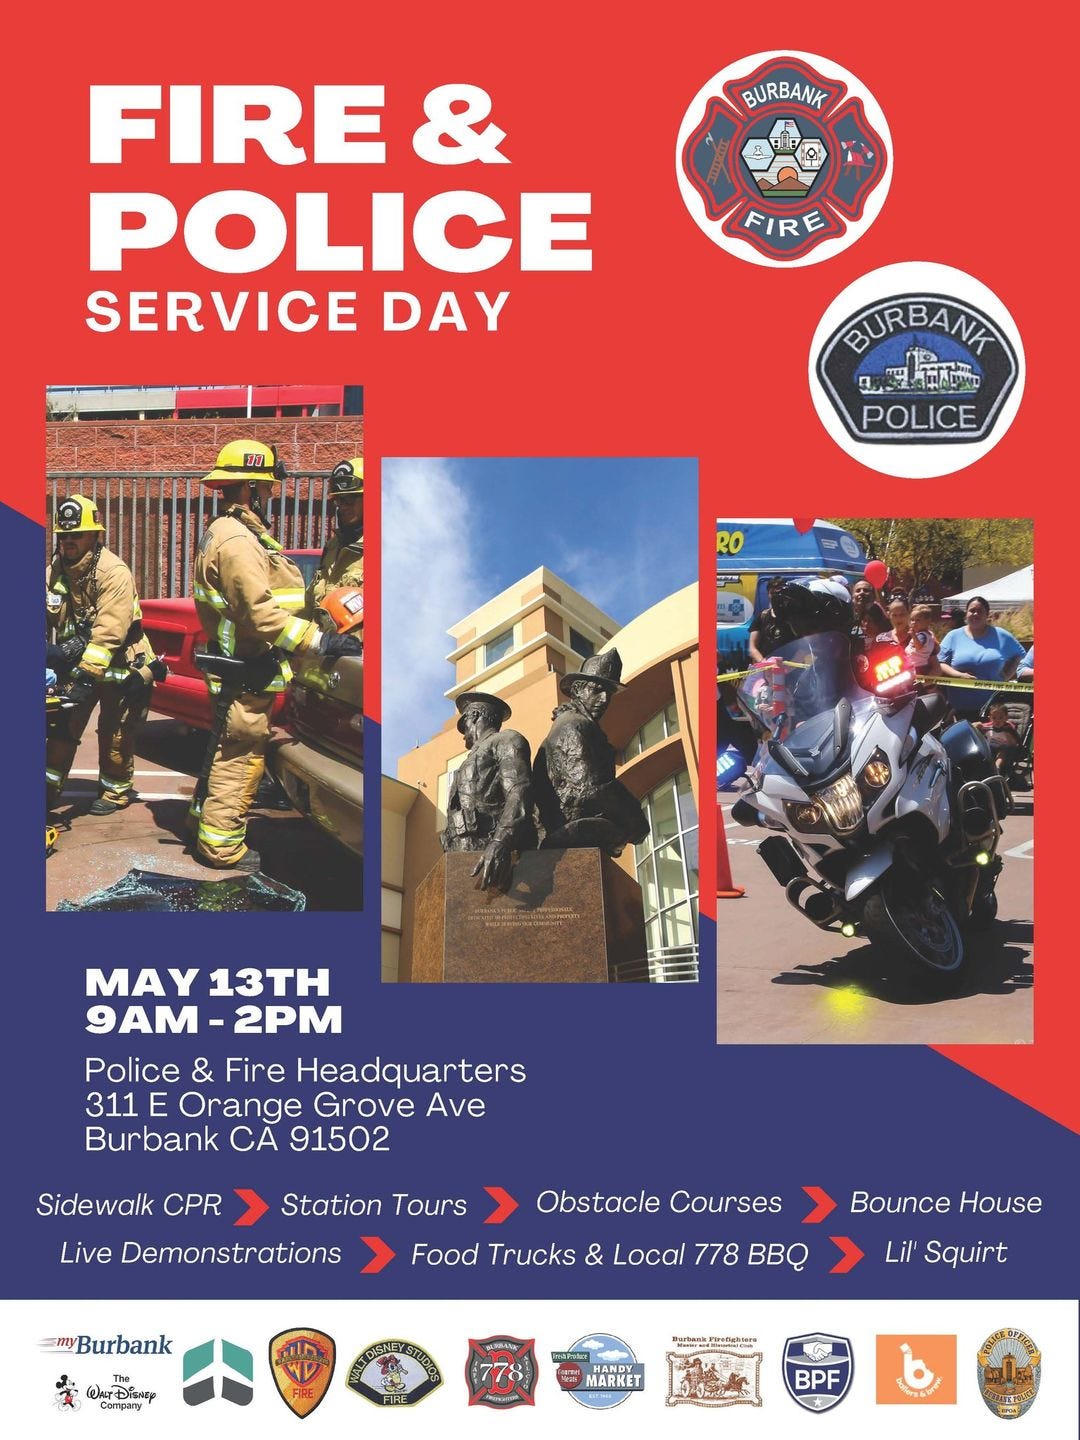 May be an image of 6 people and text that says 'BURBANK FIRE & POLICE SERVICE DAY FIRE 11 BURBANK POLICE MAY 13TH 9AM 2PM Police & Fire Headquarters 311 E Orange Grove Ave Burbank ca 91502 Sidewalk CPR Station Tours Live Demonstrations Obstacle Courses myBurbank Food Trucks & Local 778 BBQ Bounce House Lil' Squirt MARKET BPF'